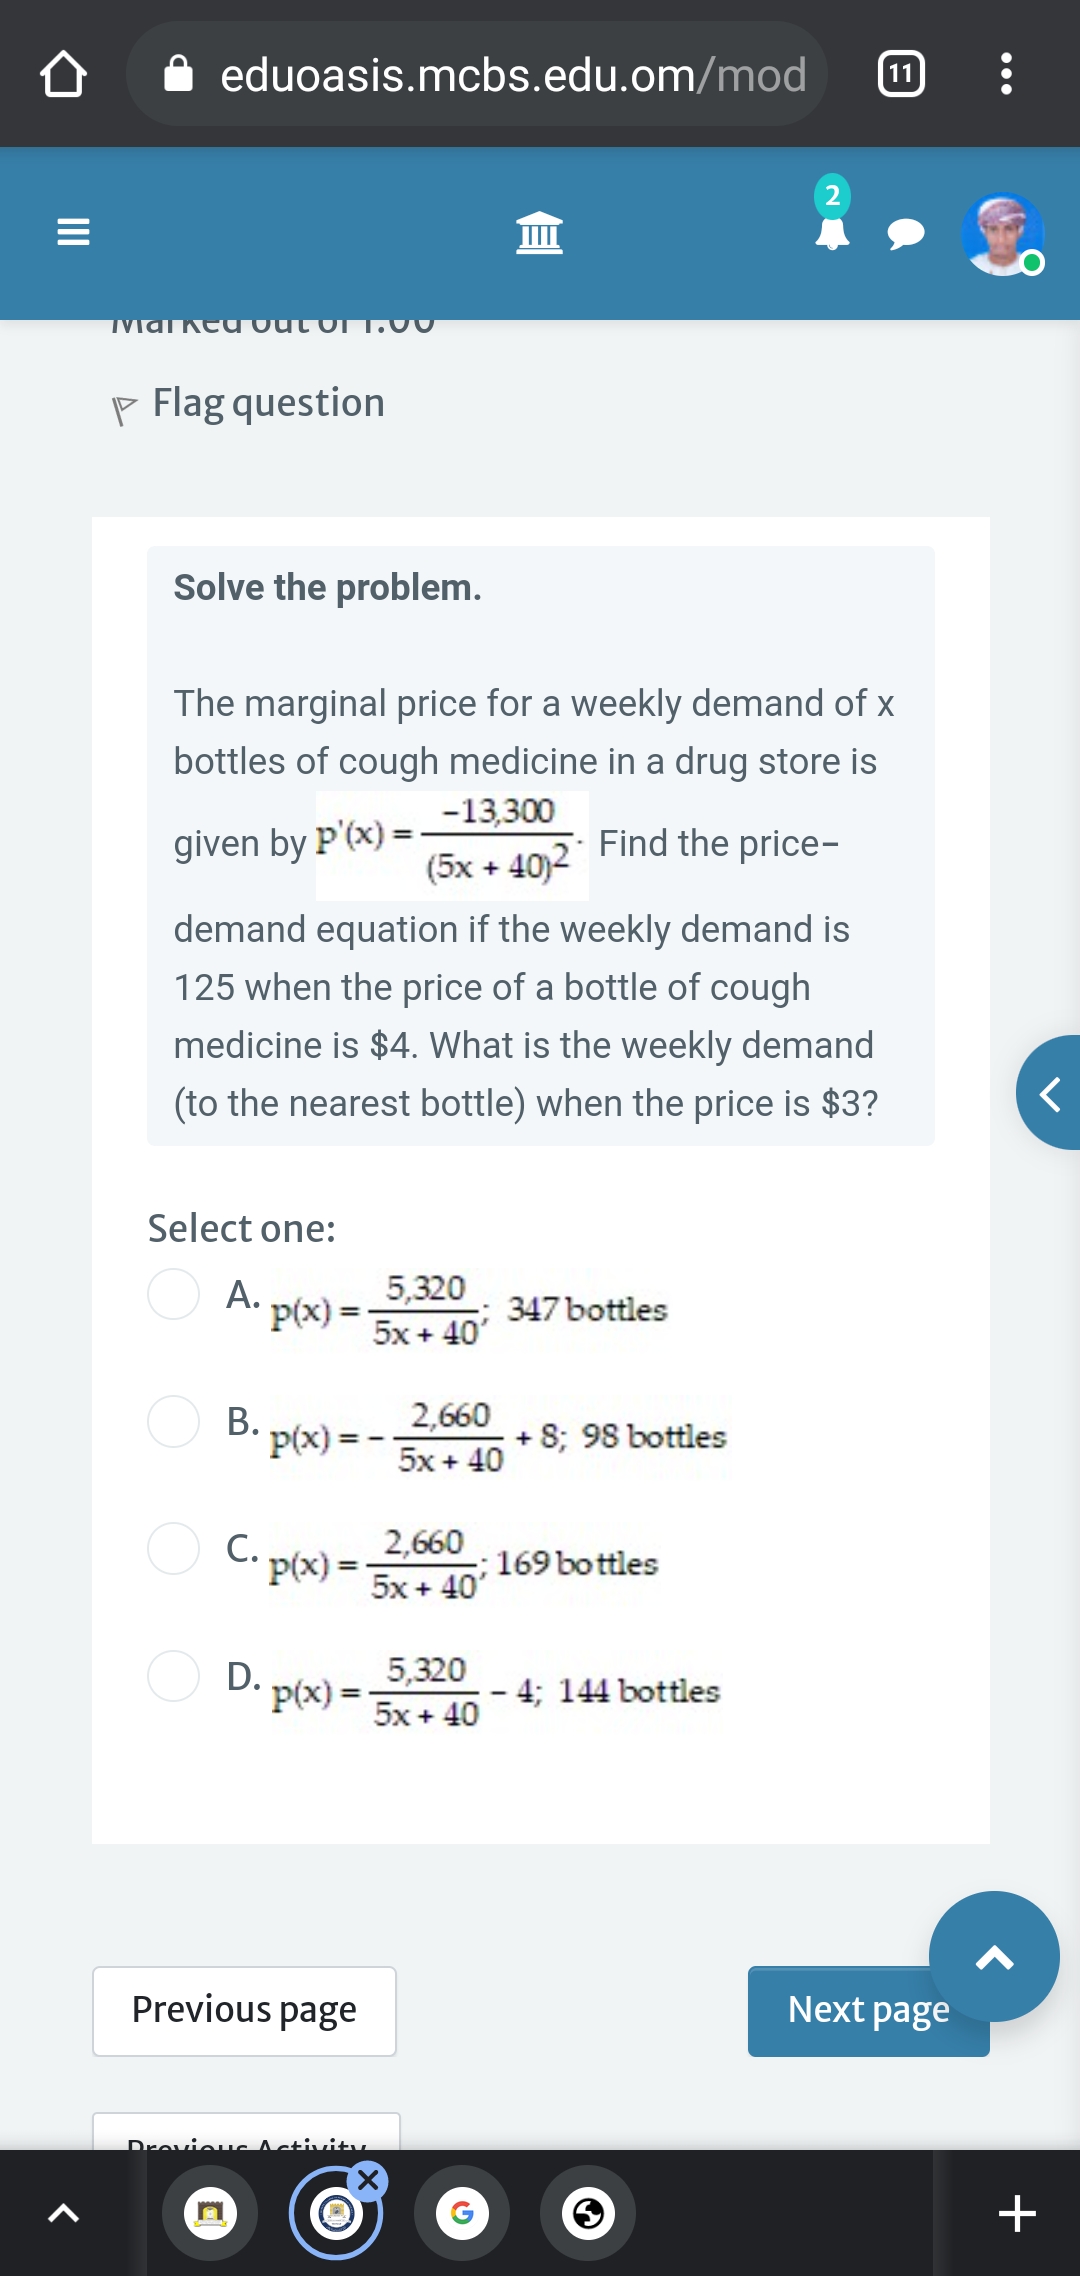 eduoasis.mcbs.edu.om/mod
11
2
Ked out
P Flag question
Solve the problem.
The marginal price for a weekly demand of x
bottles of cough medicine in a drug store is
-13,300
Find the price-
%3!
given by P'(x) =:
(5x + 40)2
demand equation if the weekly demand is
125 when the price of a bottle of cough
medicine is $4. What is the weekly demand
(to the nearest bottle) when the price is $3?
Select one:
O A.
5,320
347 bottles
P(x) = -
5x + 40'
B. p(x) =
2,660
+ 8; 98 bottles
5x + 40
O C. p(x) =
2,660
5x + 40'
169 bottles
%3D
5,320
D. p(x) =
5x + 40
4; 144 bottles
Previous page
Next page
Drevieuc Activitty
II
